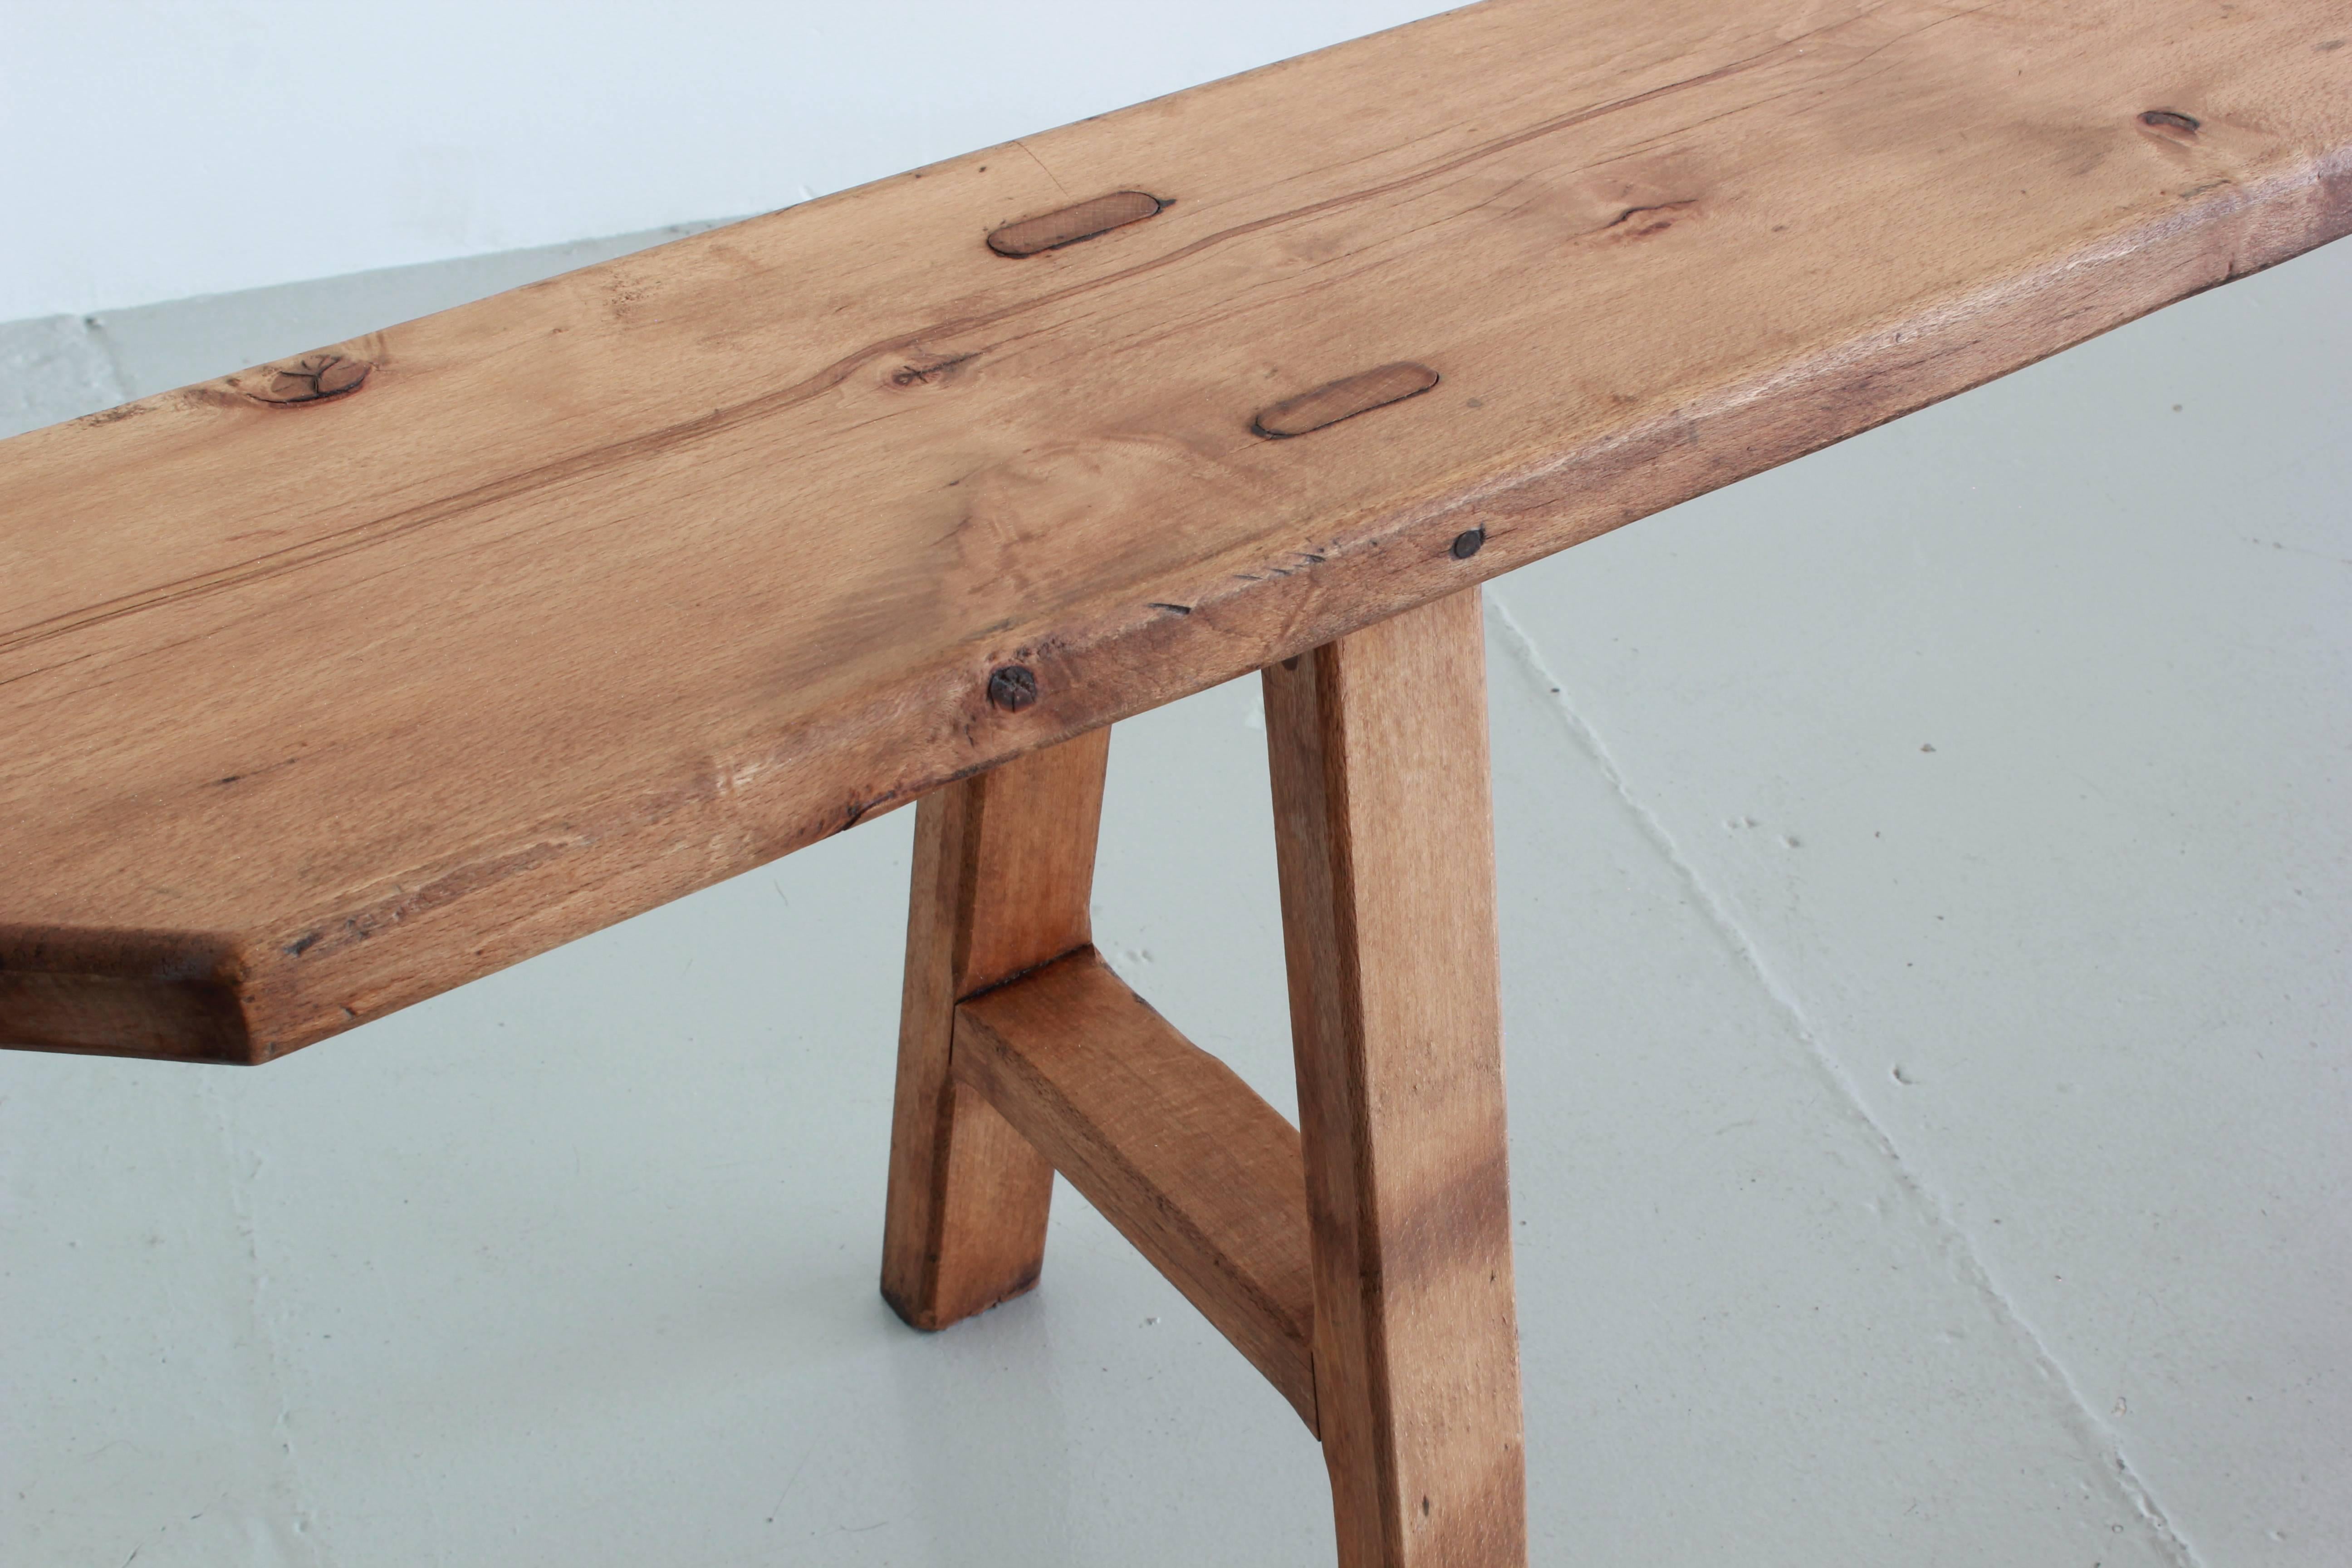 Simple bench from France with wonderful patina and lines.